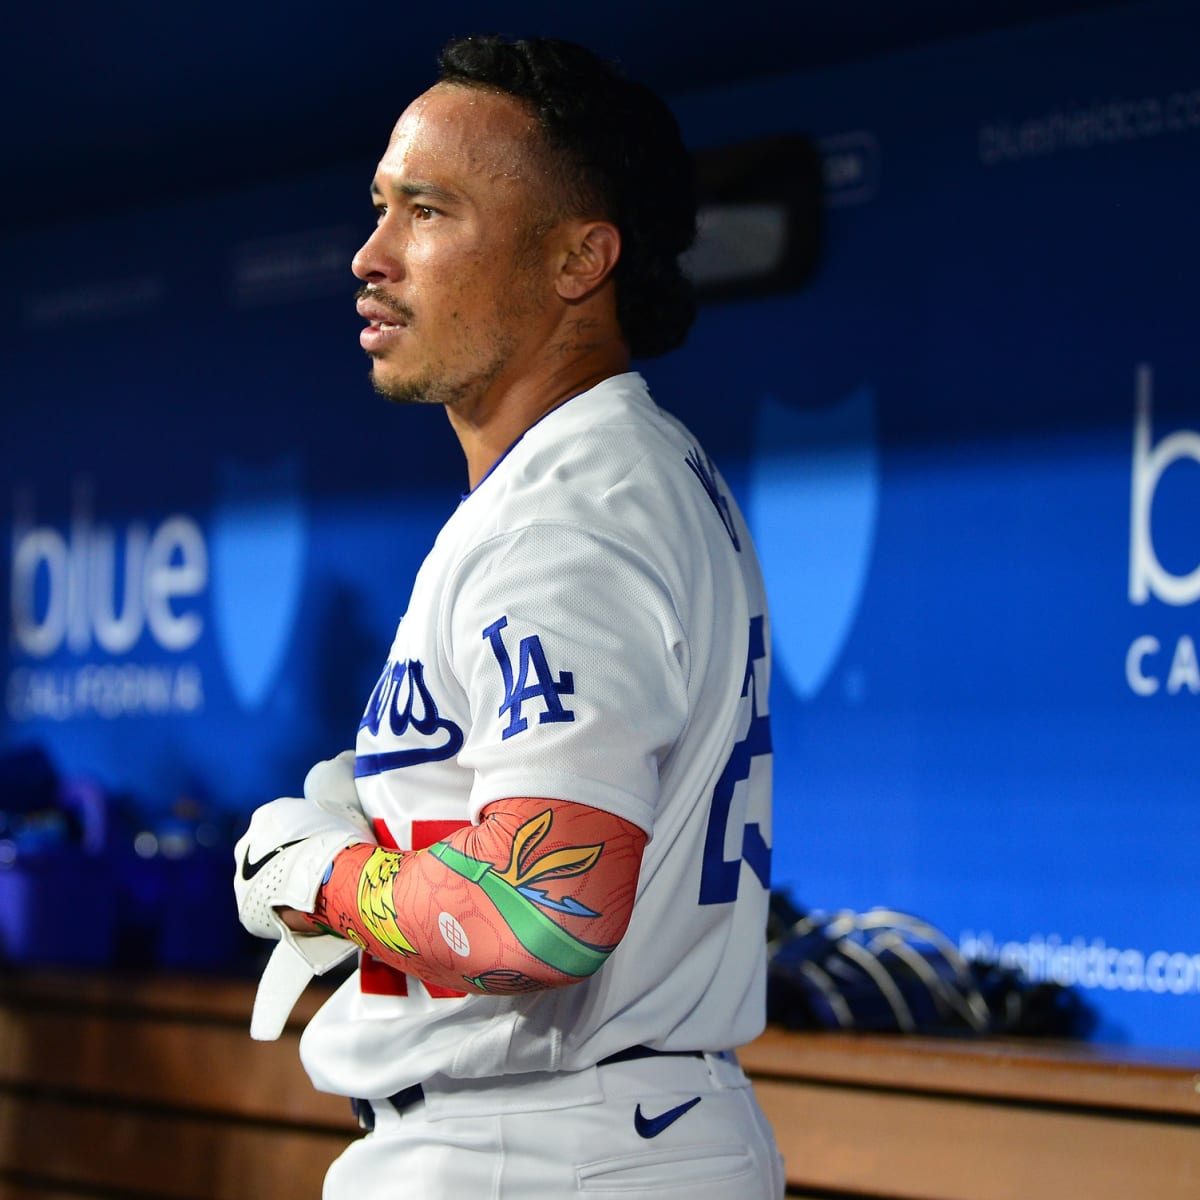 Kolten Wong's goodbye video shows why the name on the back of the